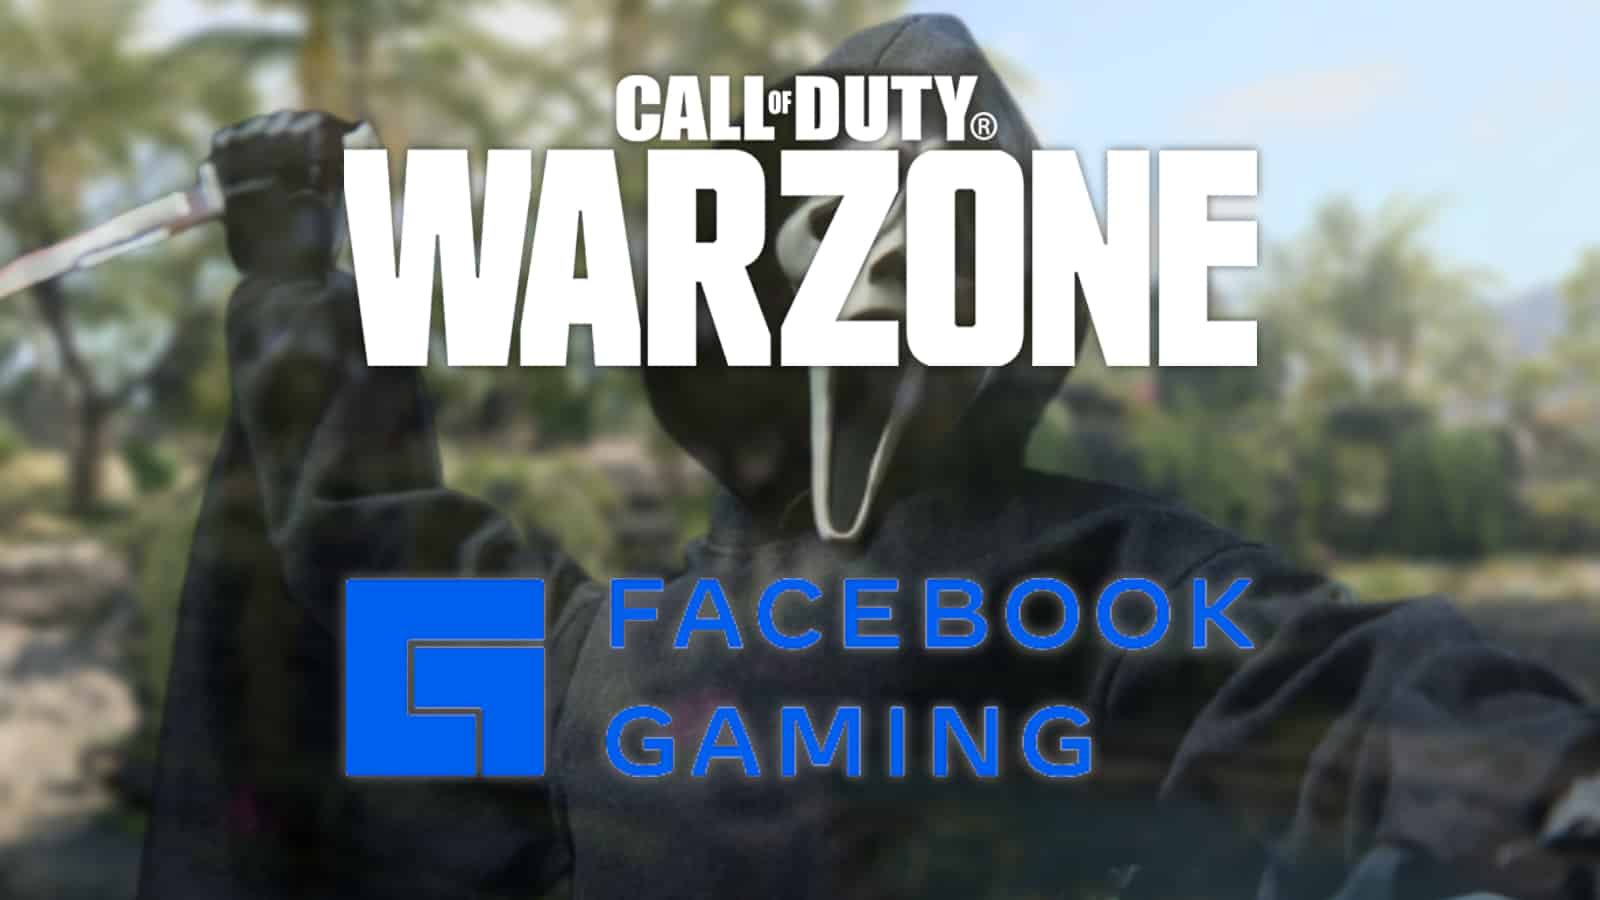 Facebook Gaming Warzone streamer claims platform benefits from hackers